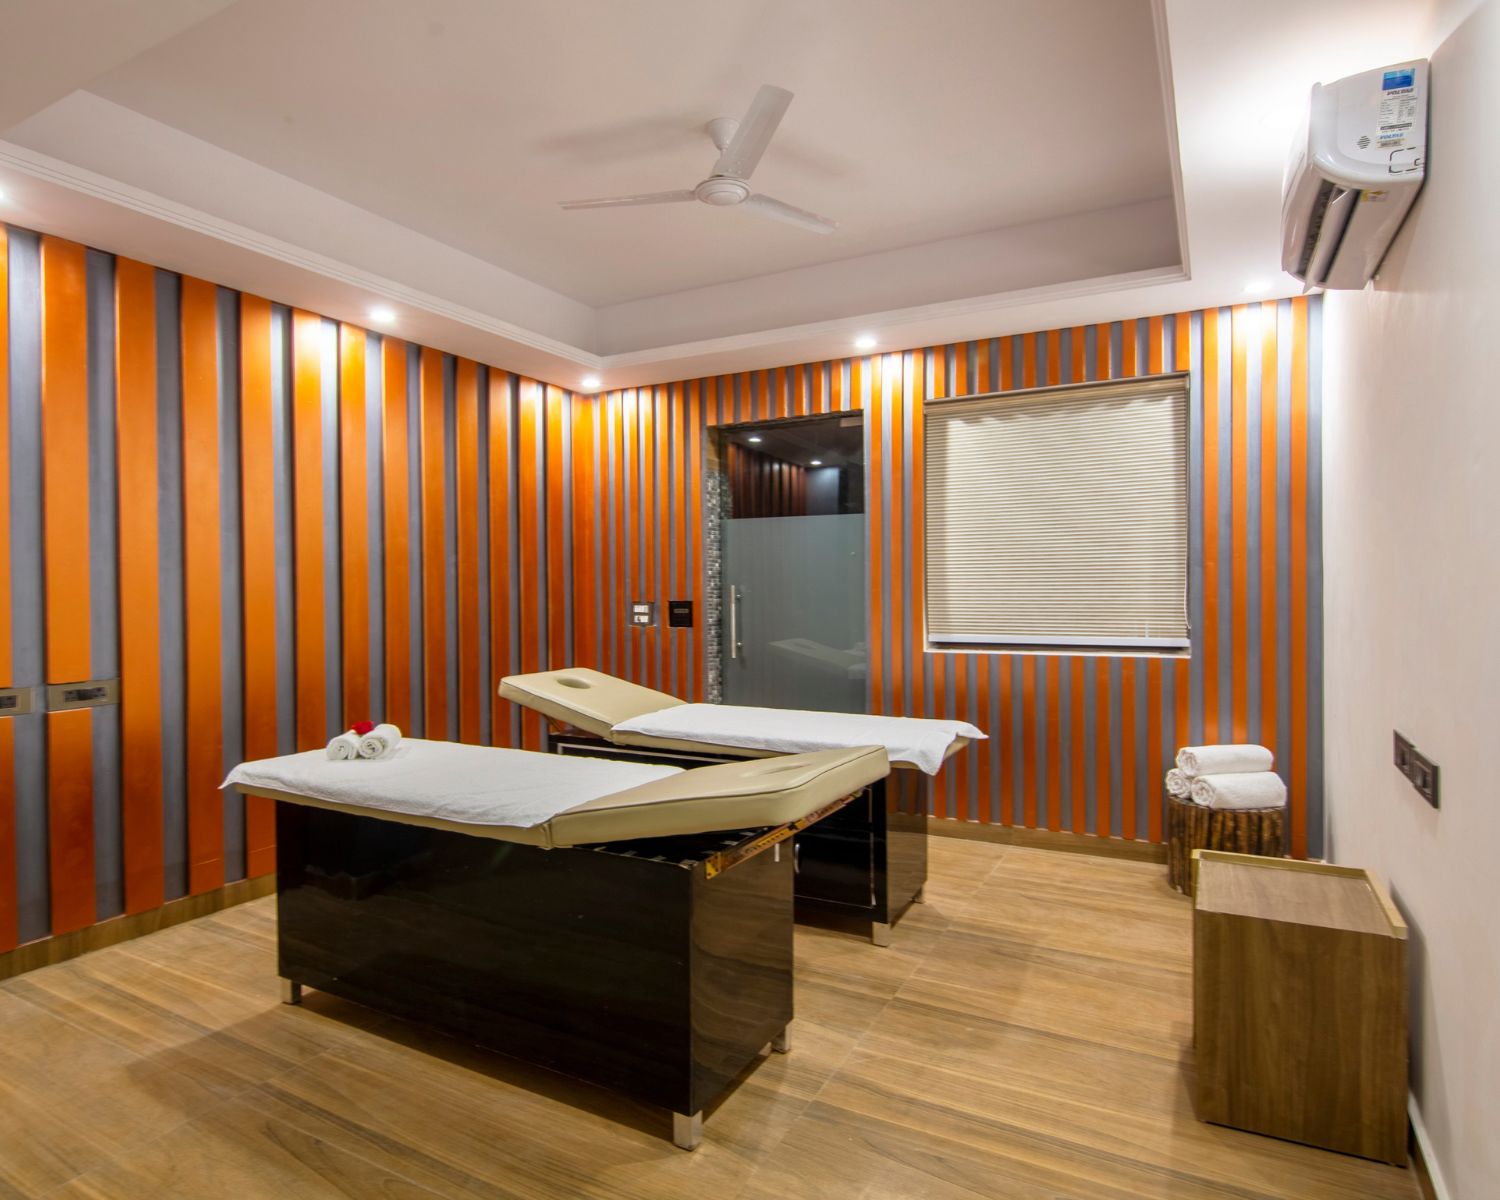 Spa & Jacuzzi In Noida